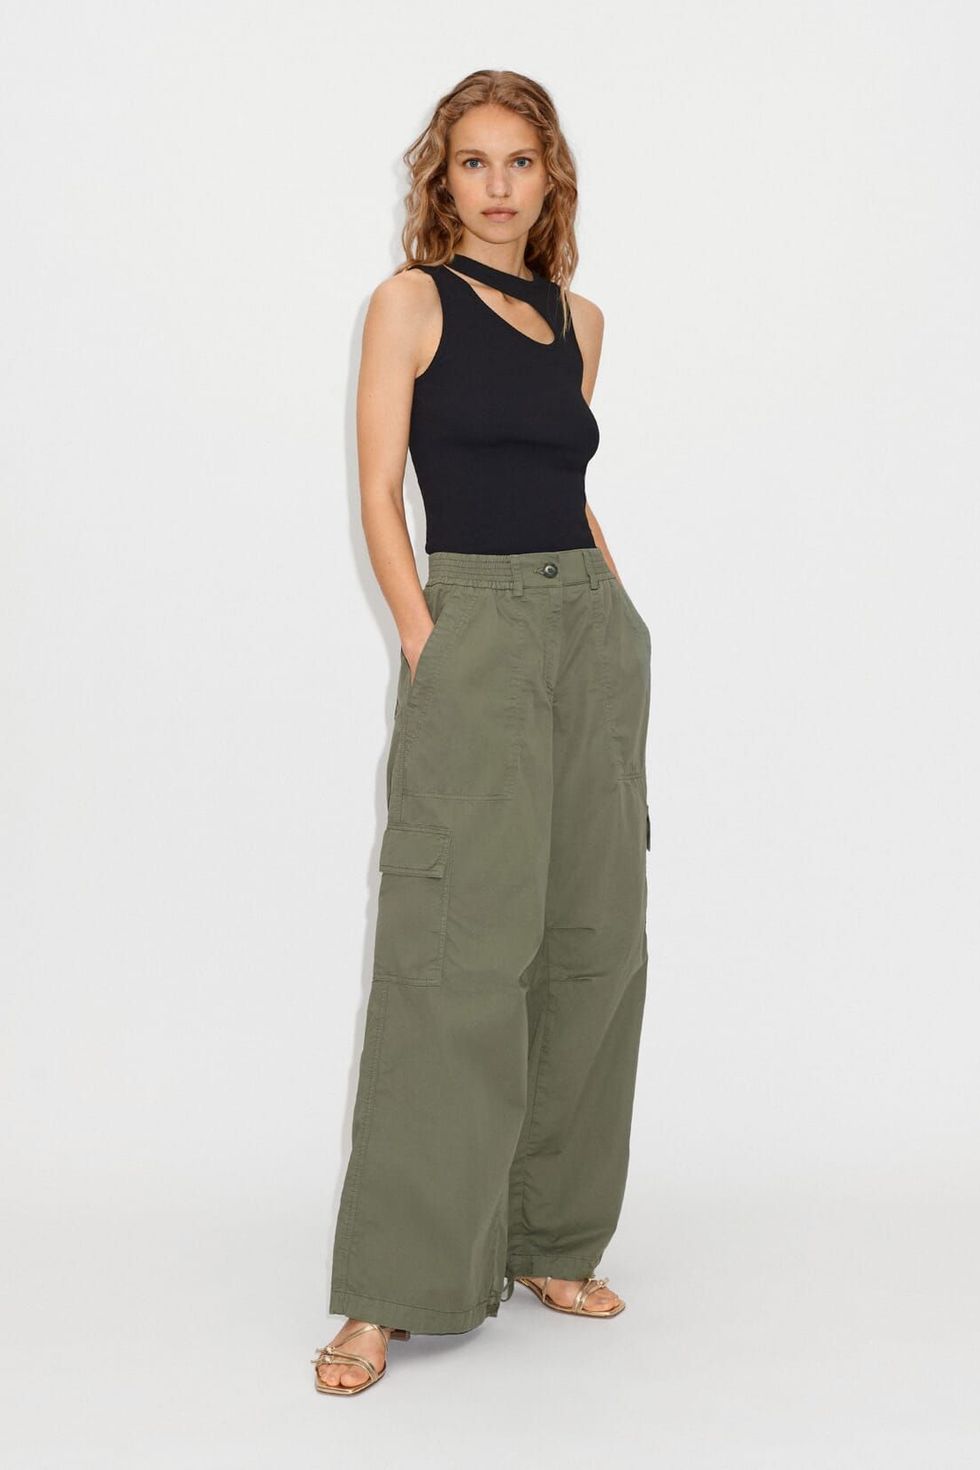 The 31 Best Cargo Pants for Women, According to Stylists and Celebrities